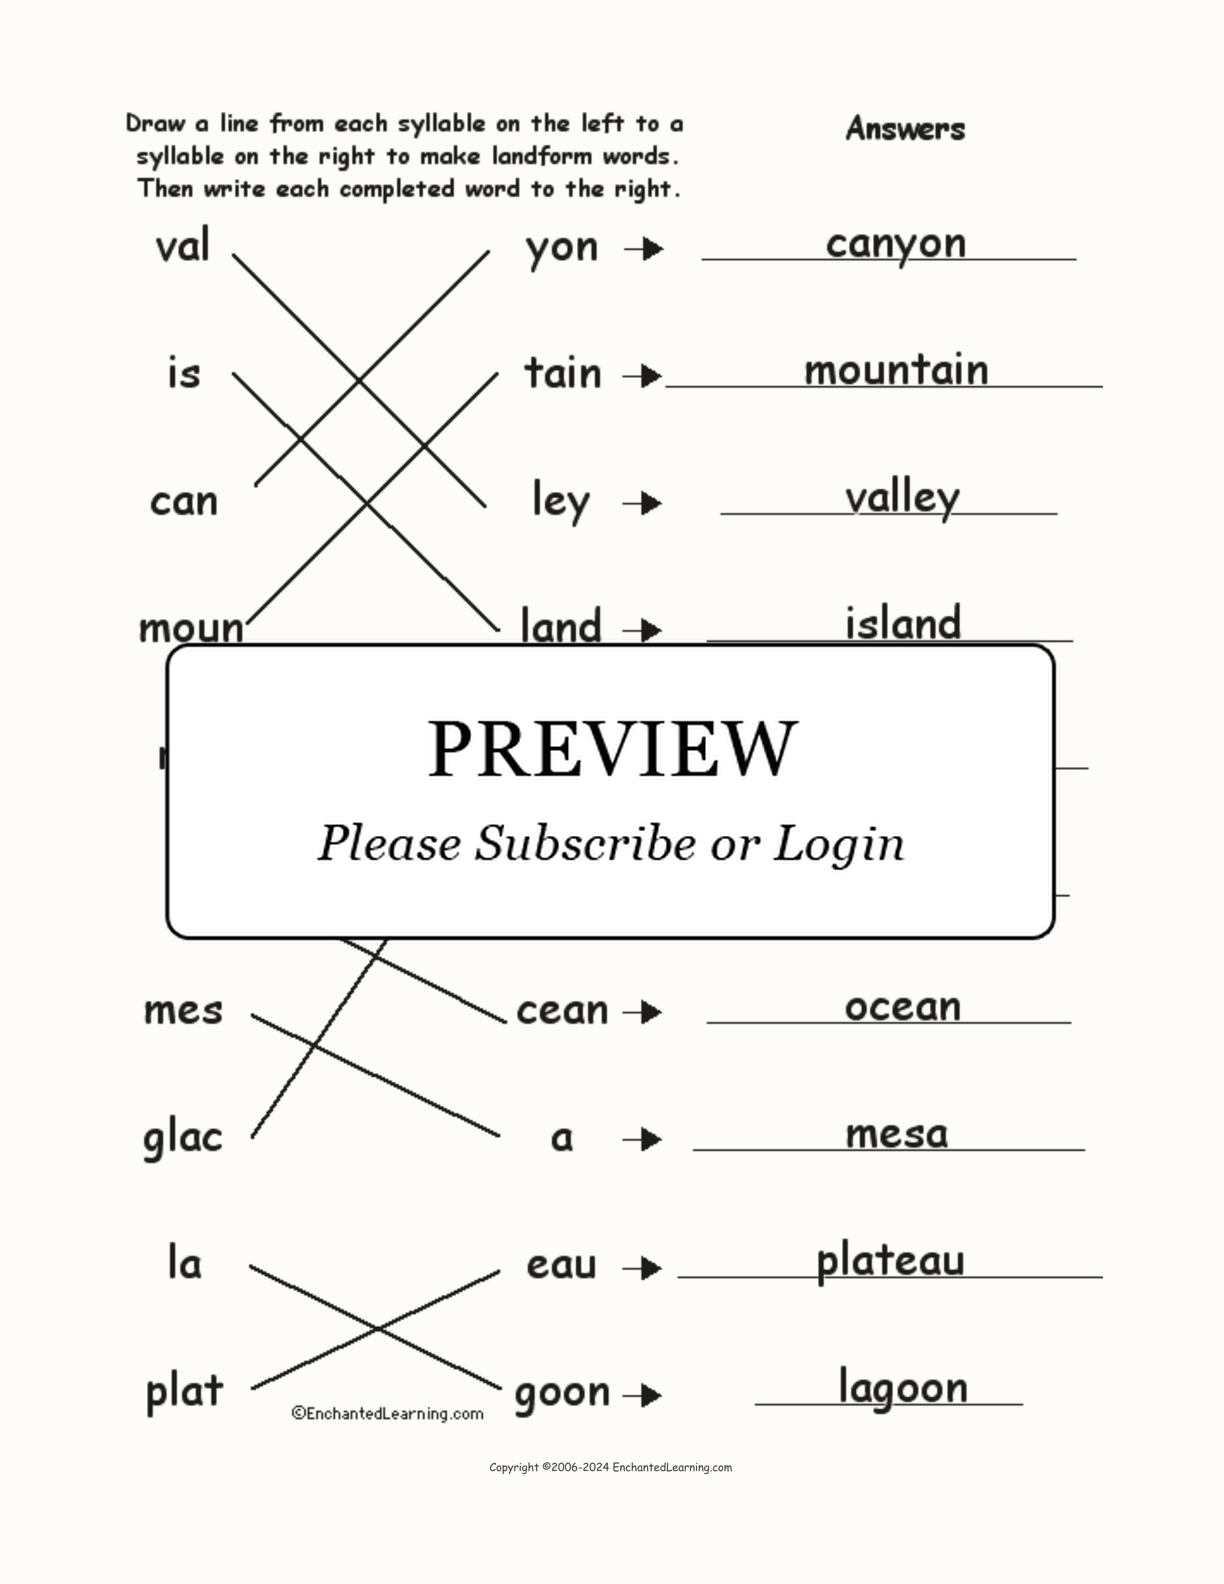 Match the Syllables: Landform Words interactive worksheet page 2